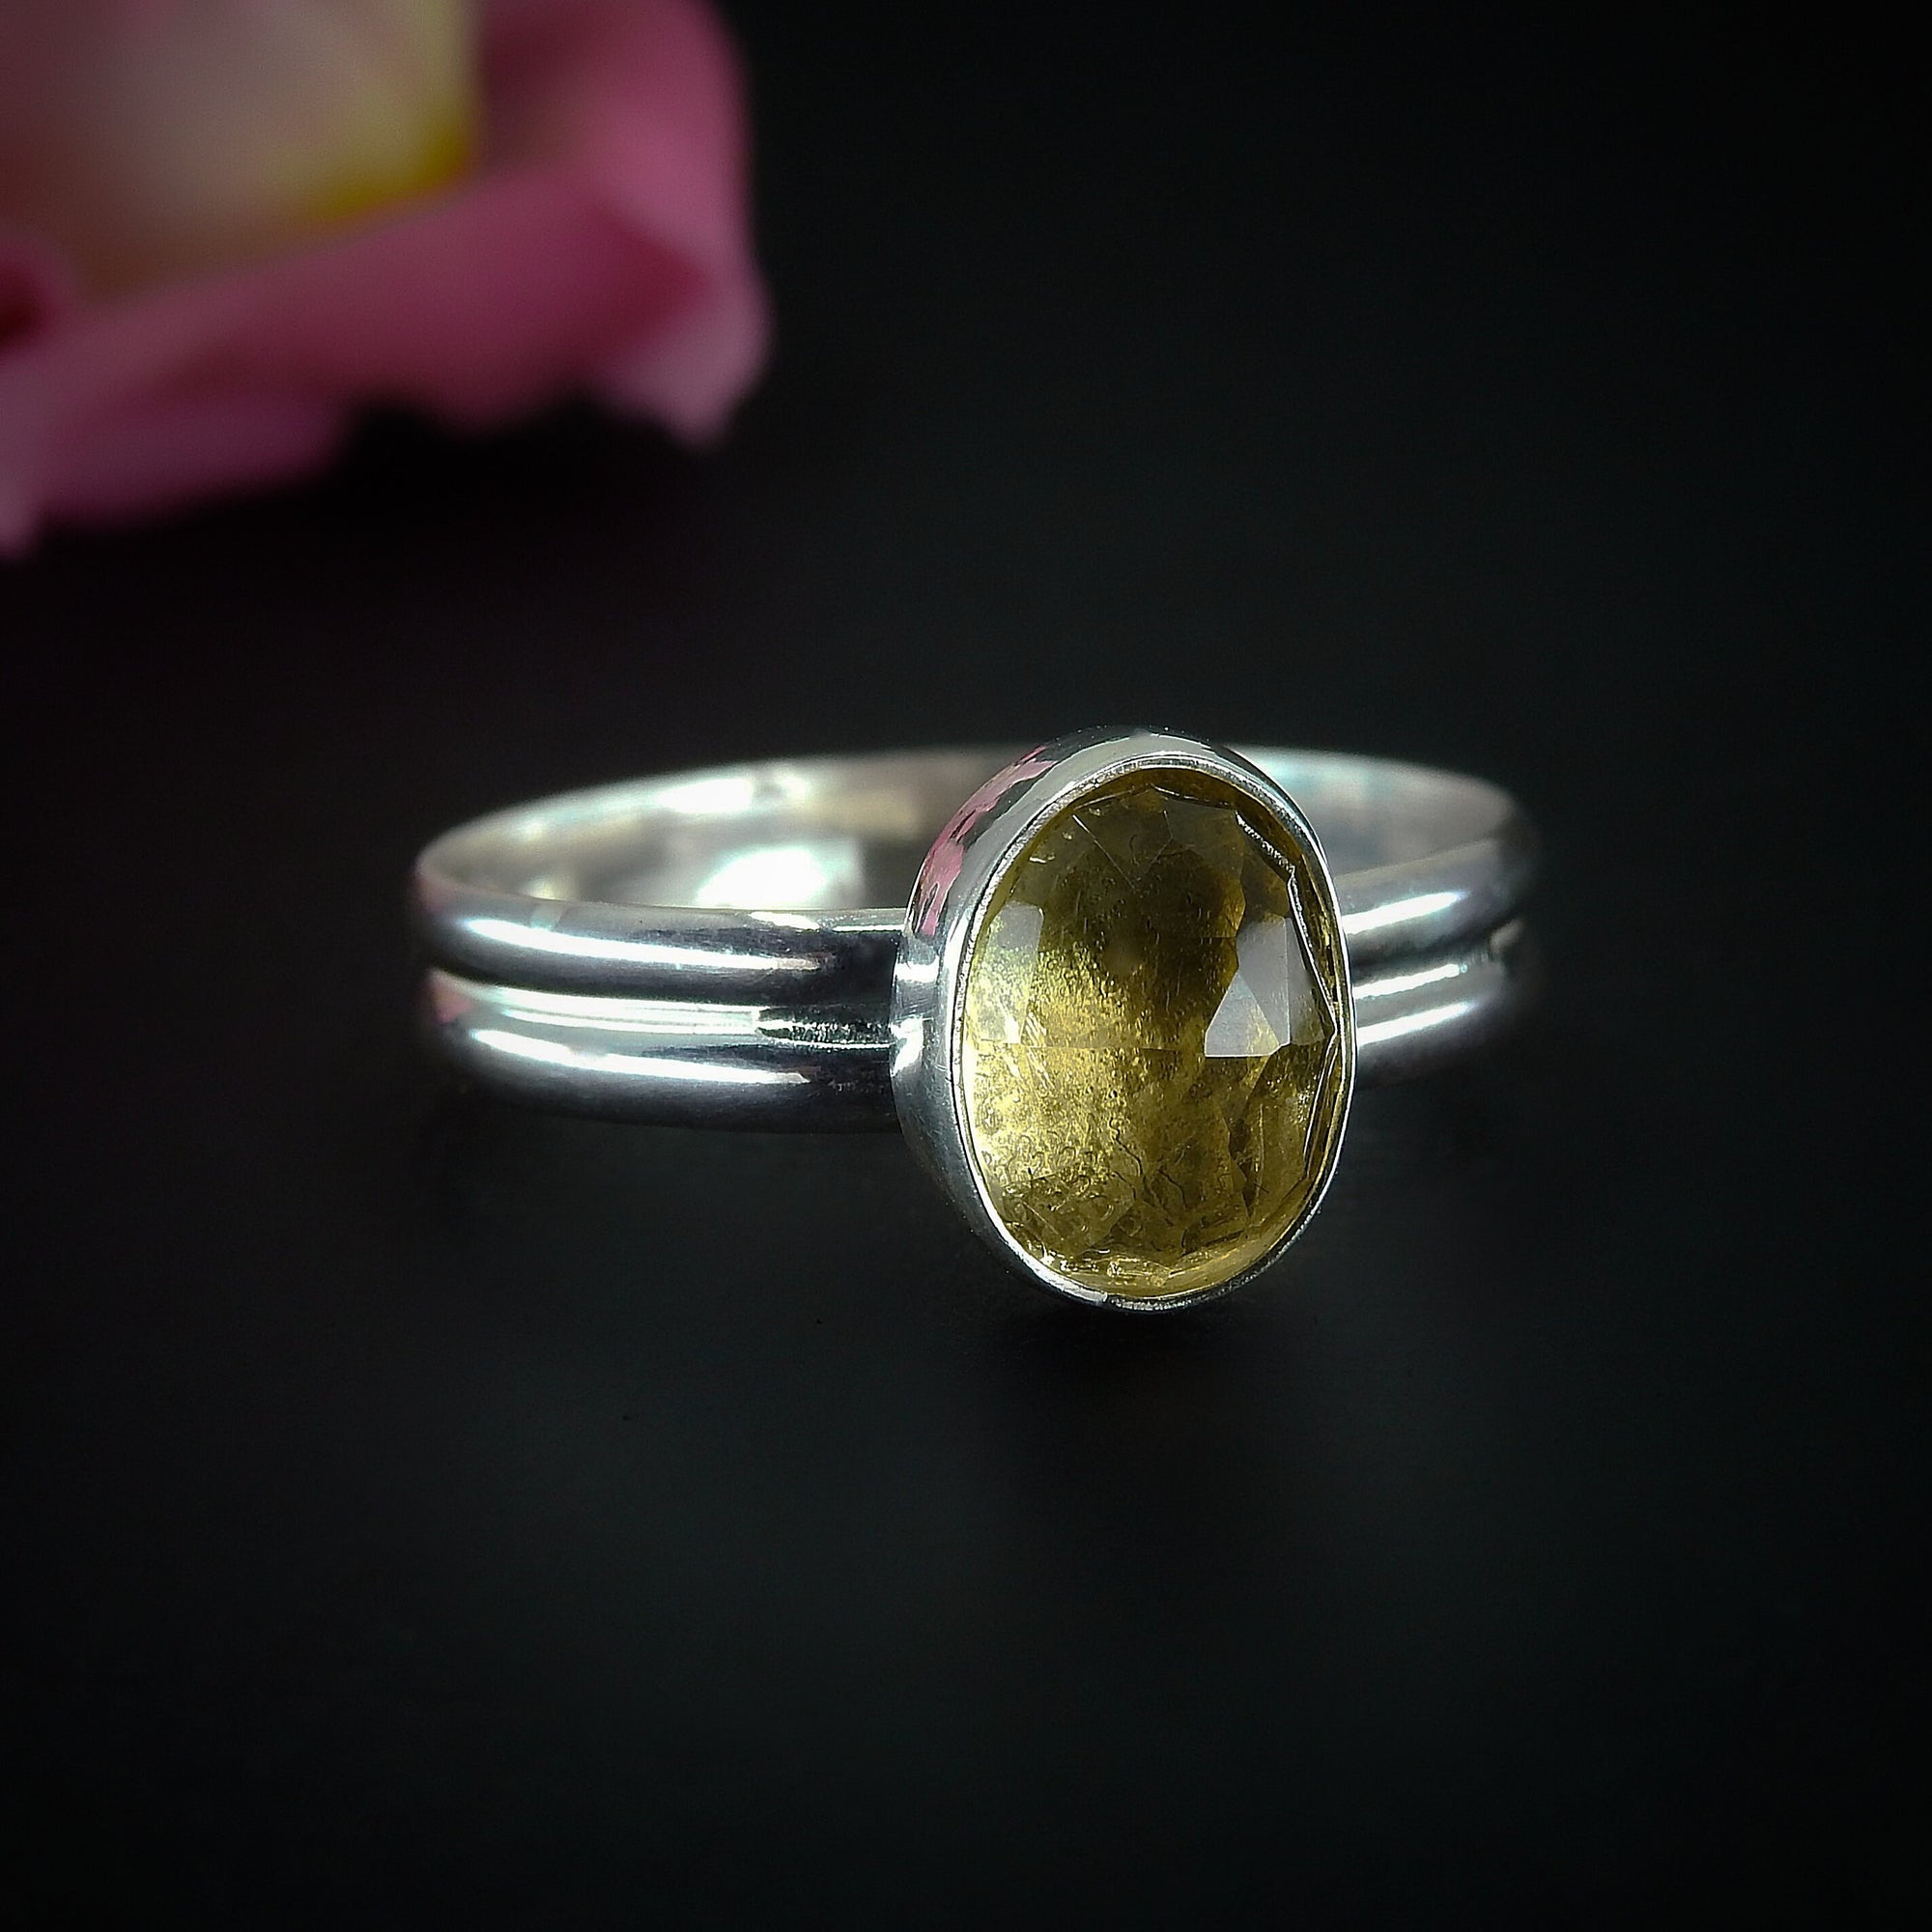 Citrine Ring - Size 11 1/4 to 11 1/2 